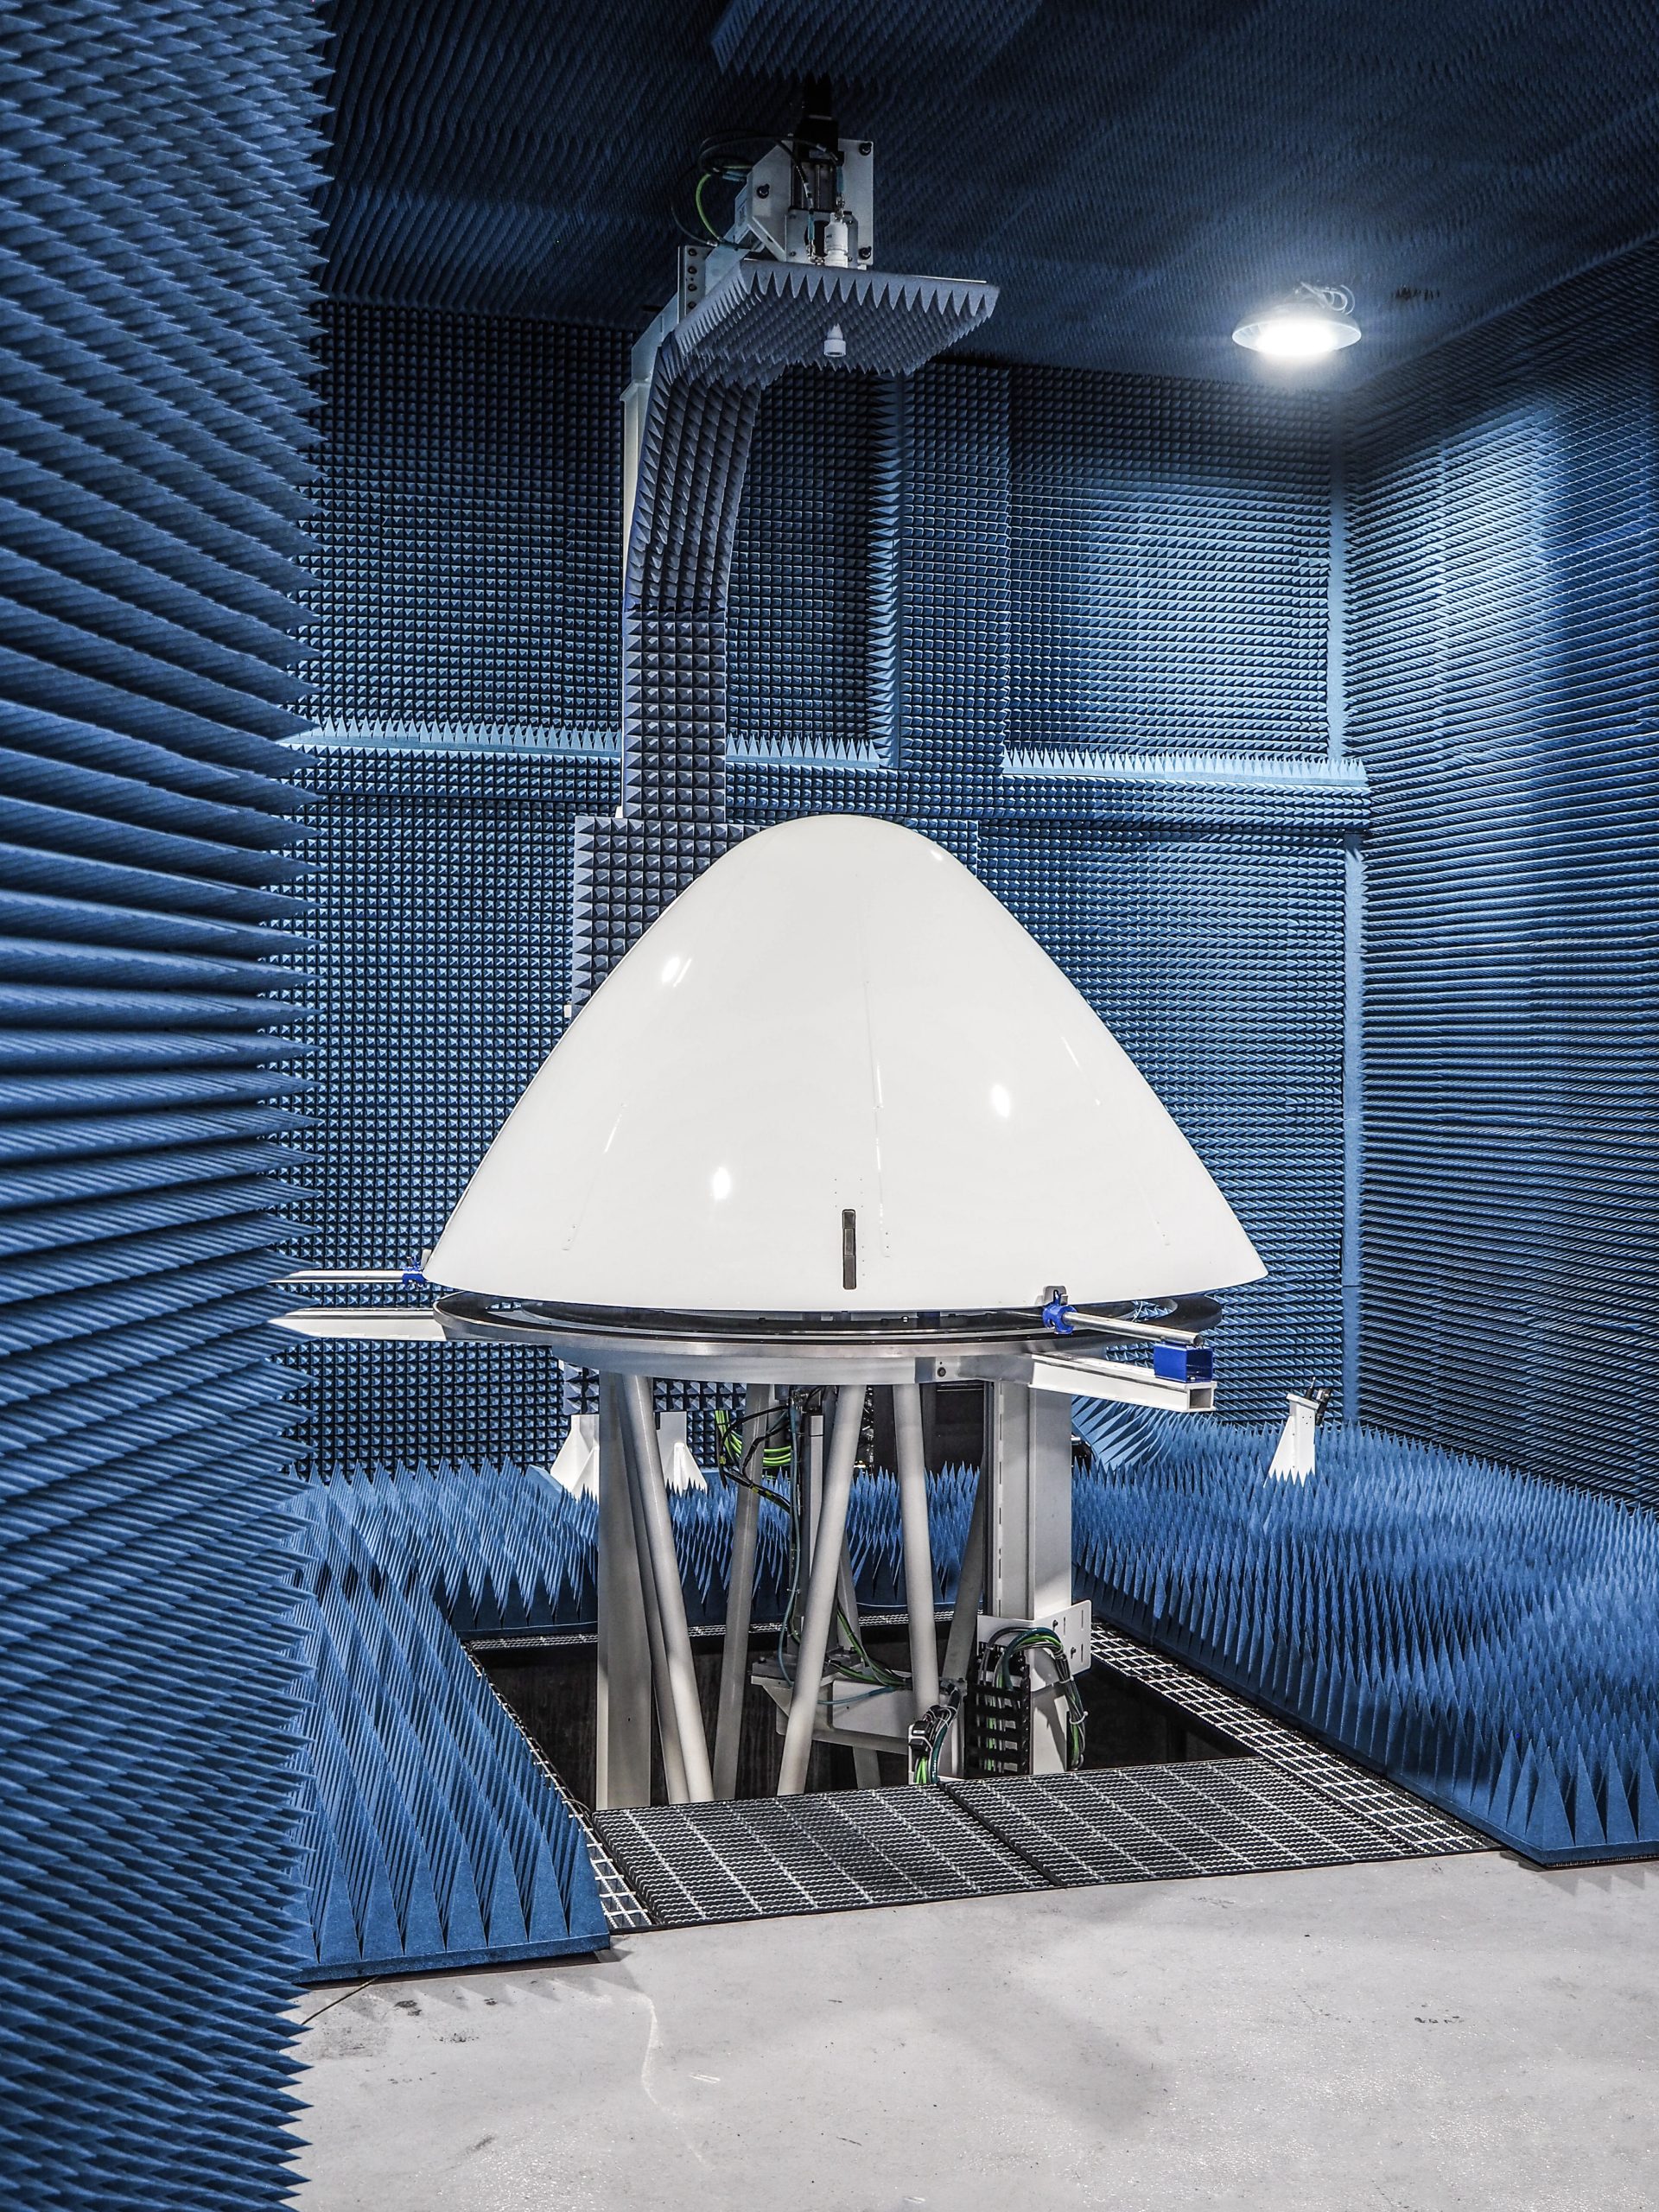 From the Ground Up: M1 Reveals its New Radome Test Range